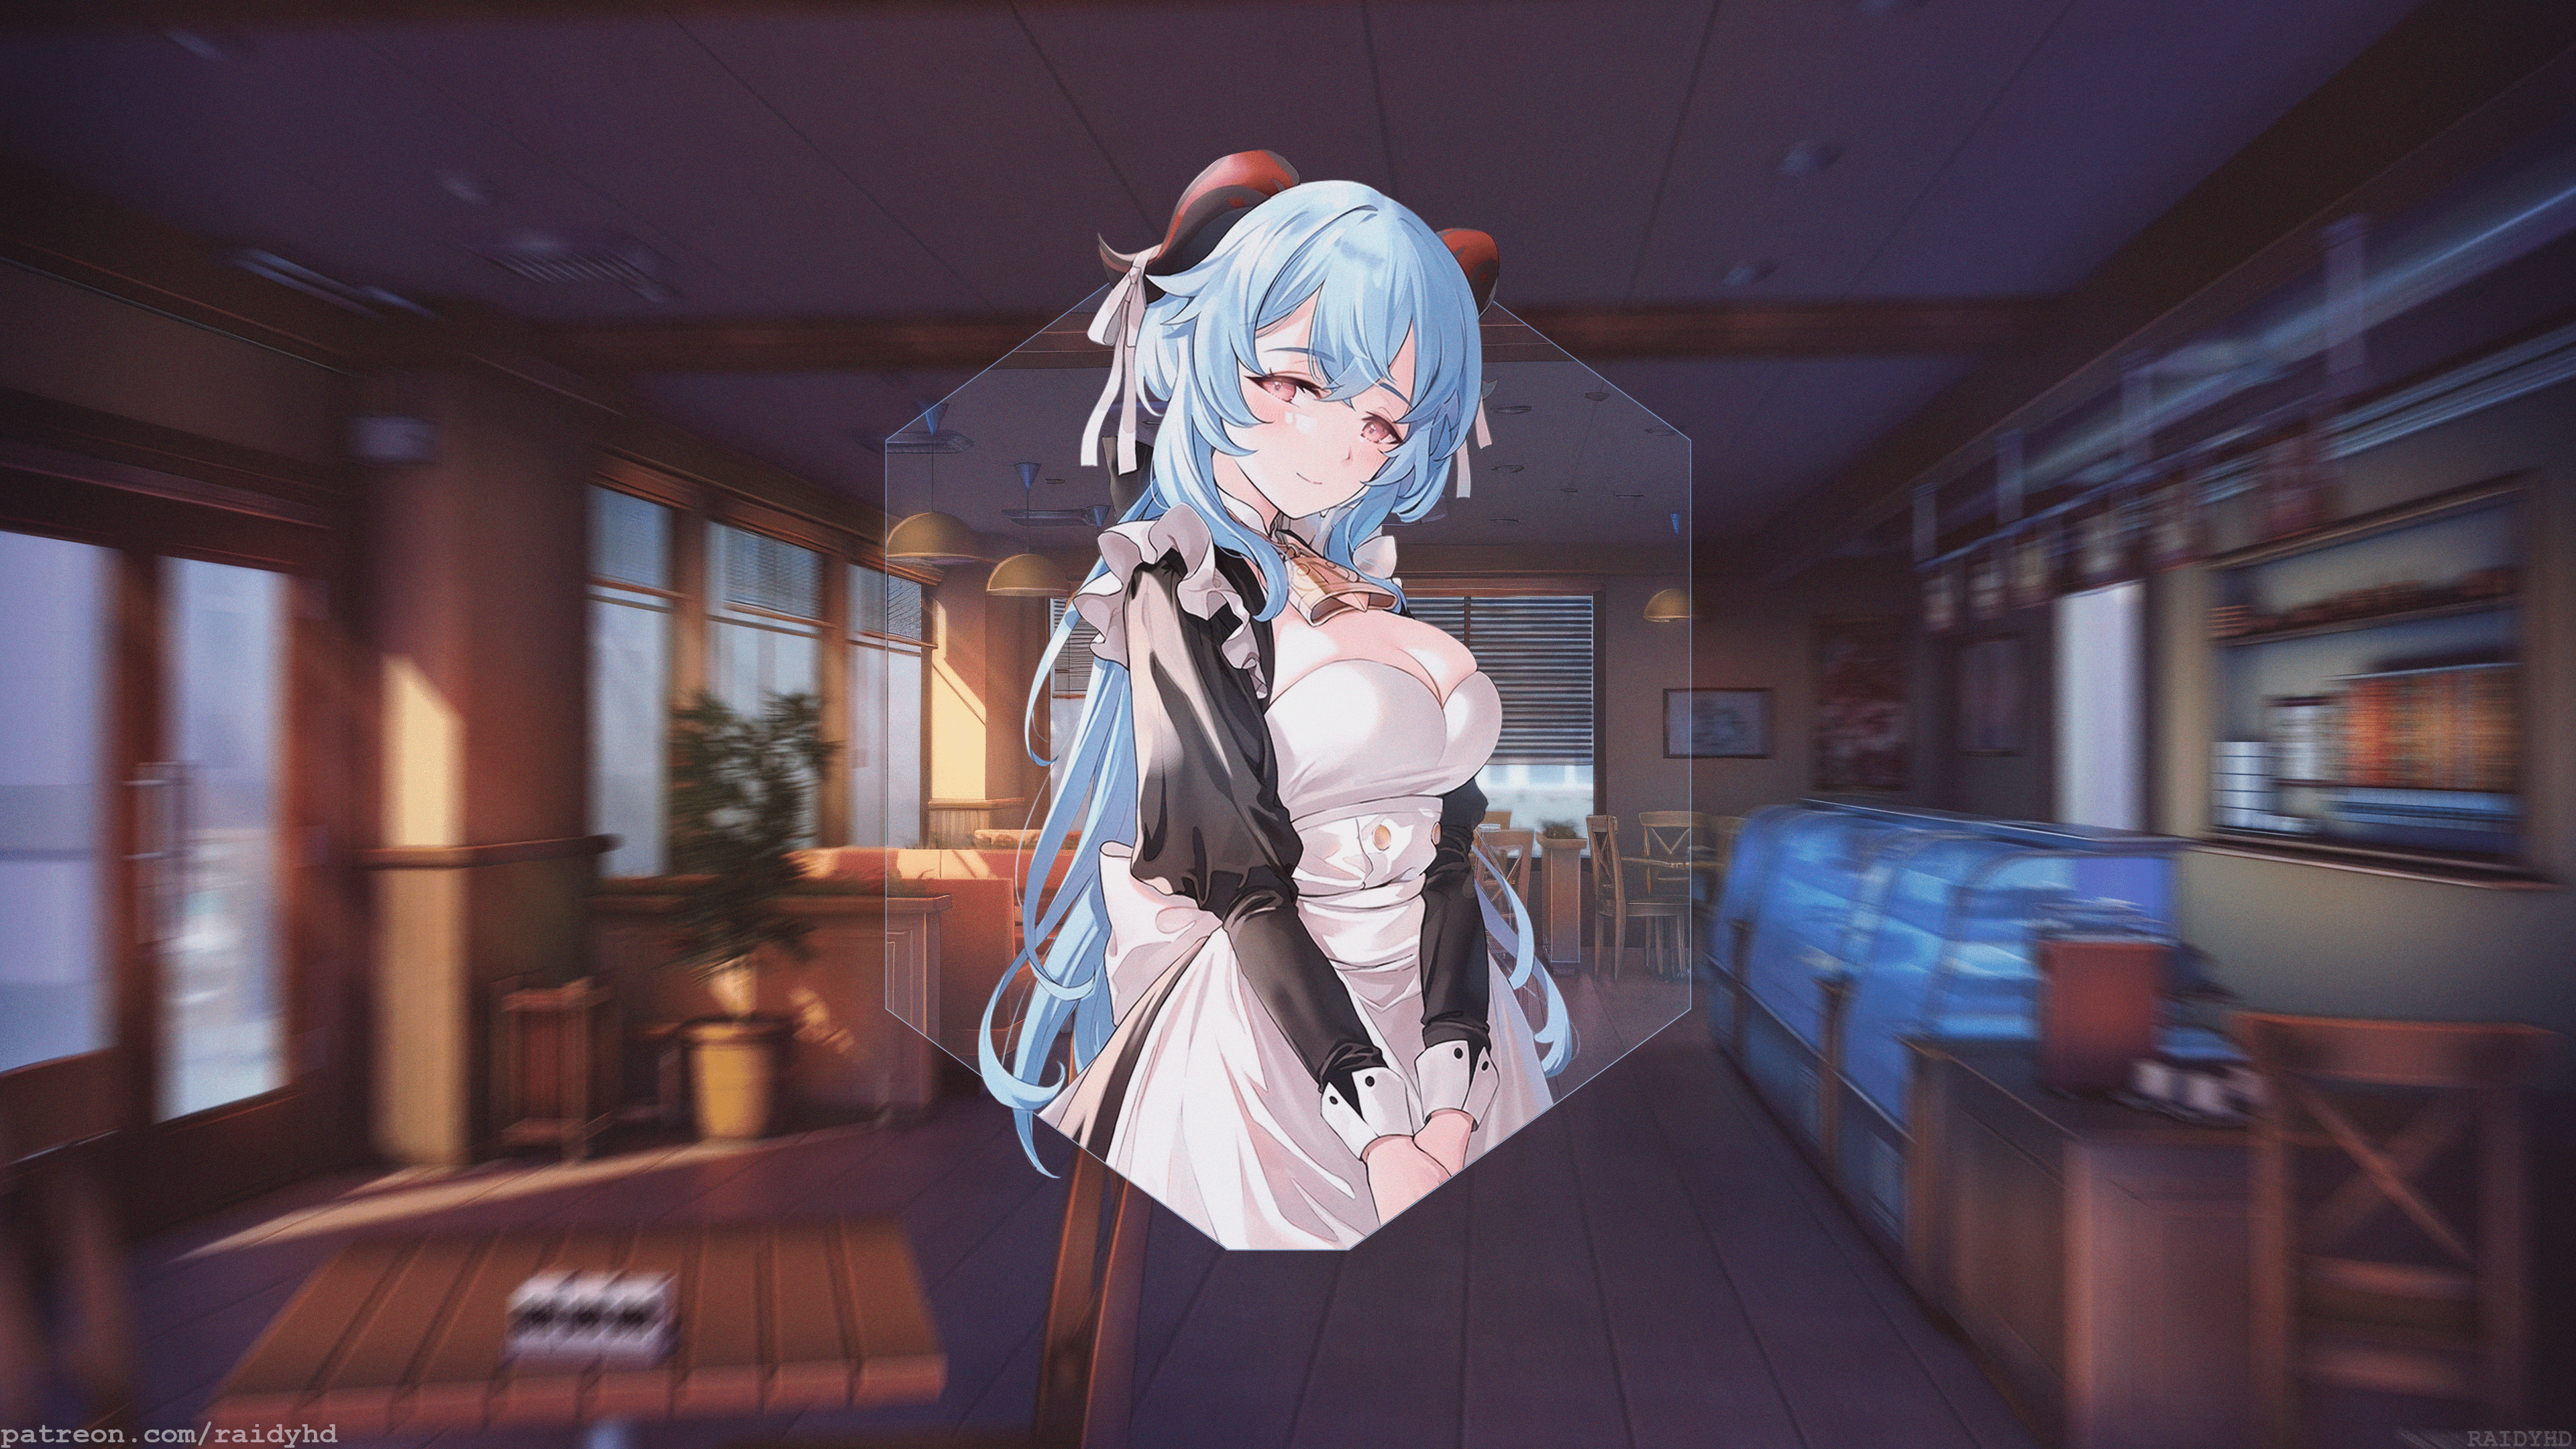 Anime 3840x2160 Ganyu (Genshin Impact) Genshin Impact anime anime girls picture-in-picture maid outfit